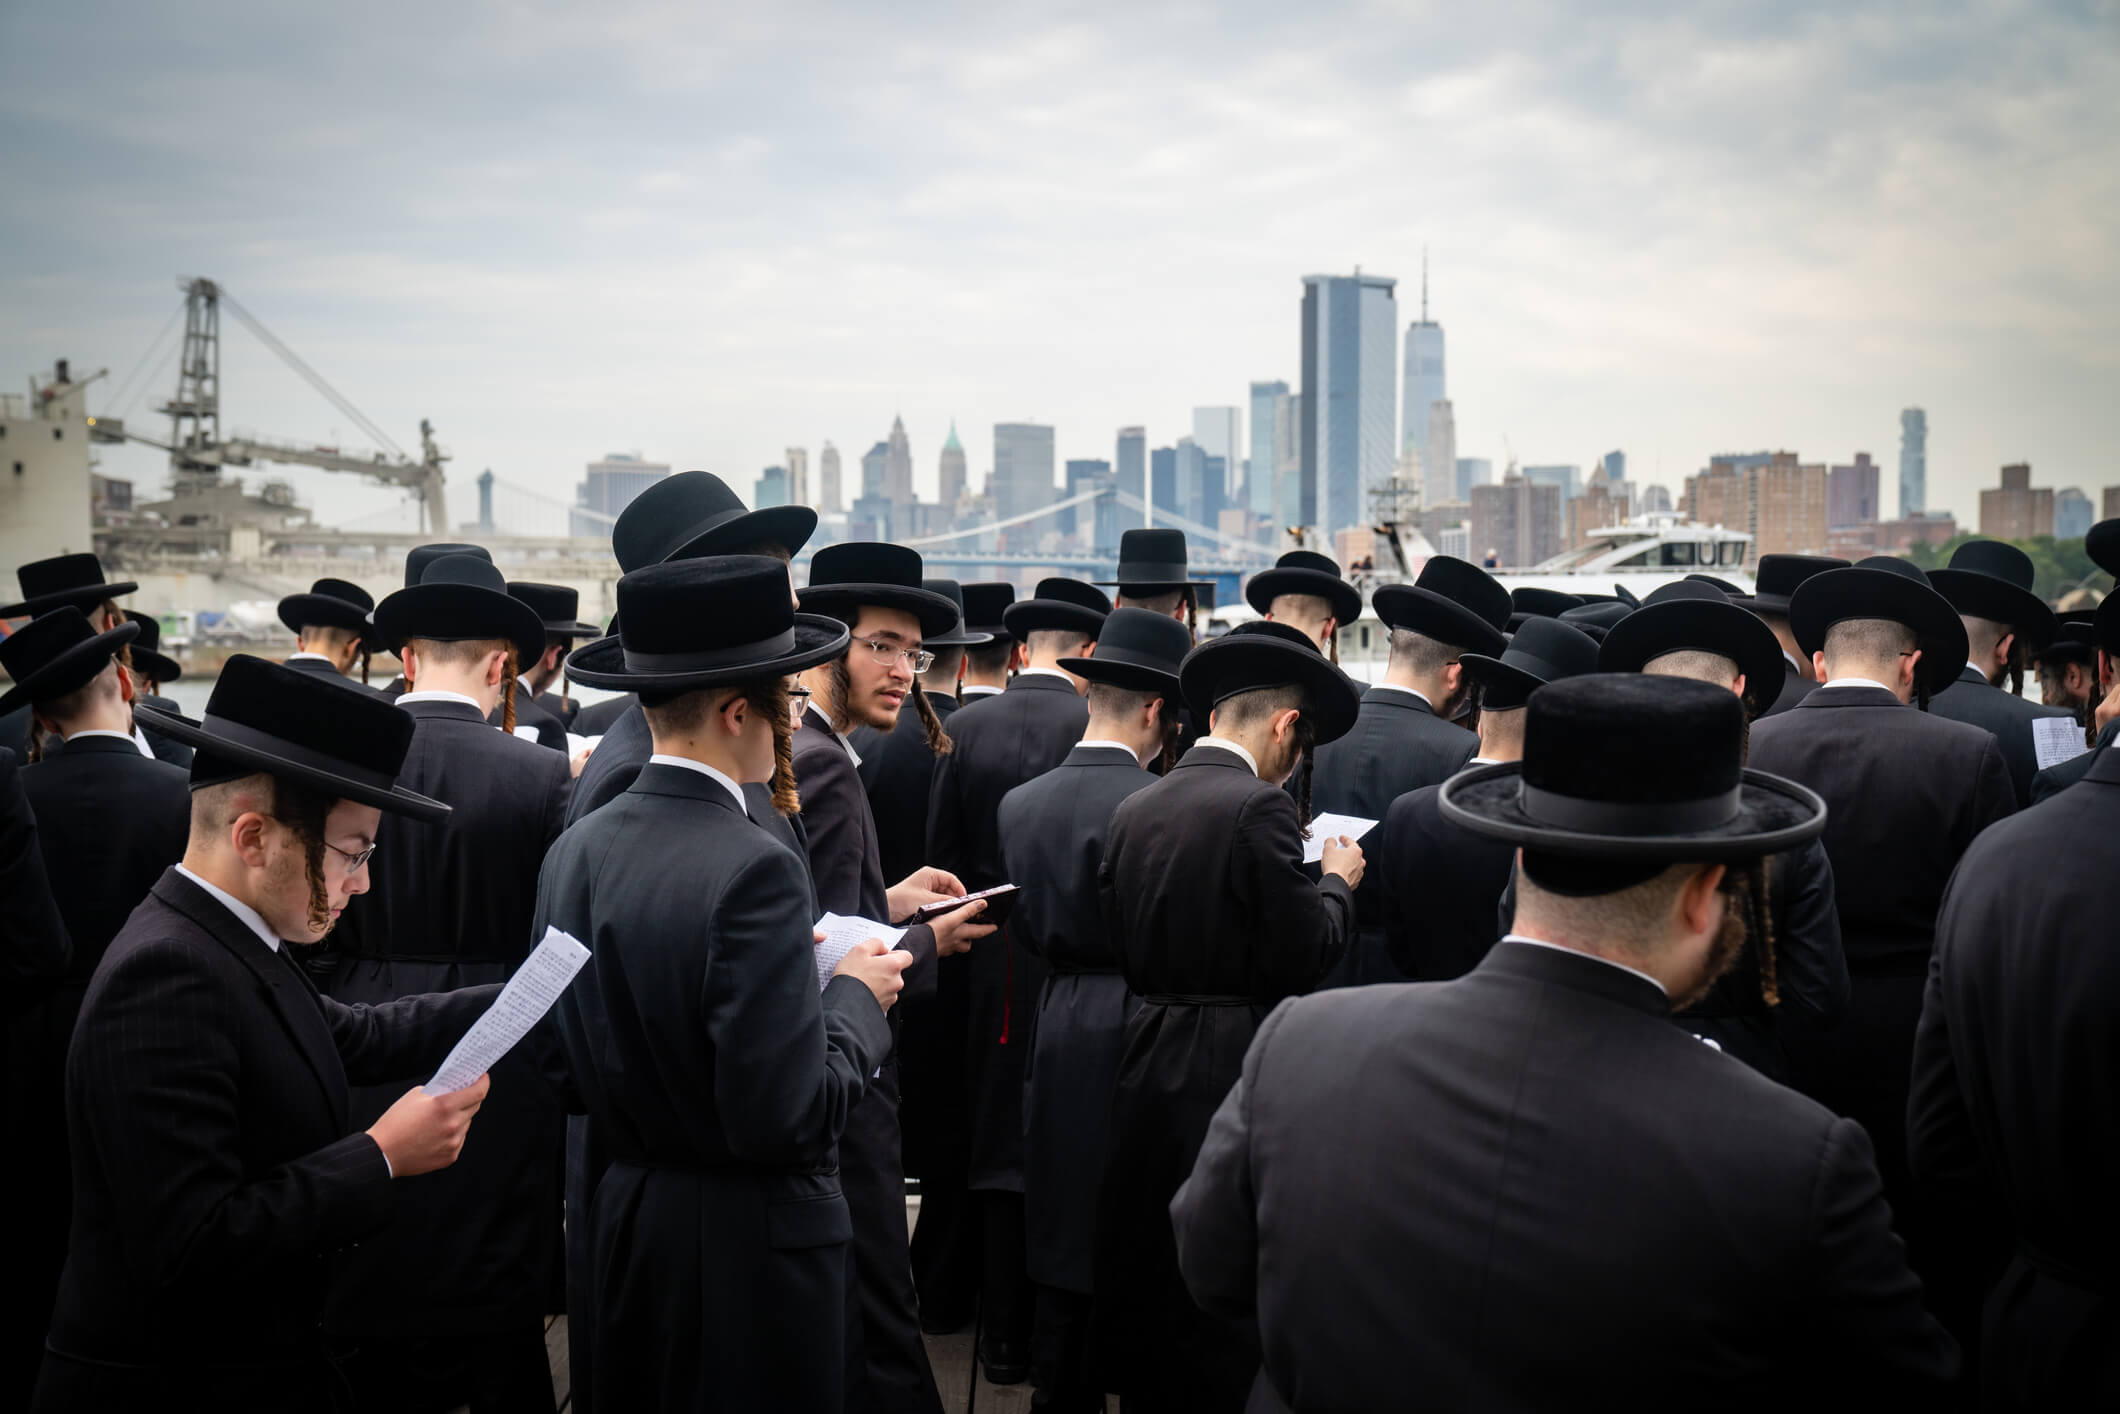 Hasidic Jews from the Williamsburg neighborhood of Brooklyn, New York, gather for the tashlich New Year’s ceremony at the shore of the East River, September 24, 2020 (Wirestock/Getty Images)